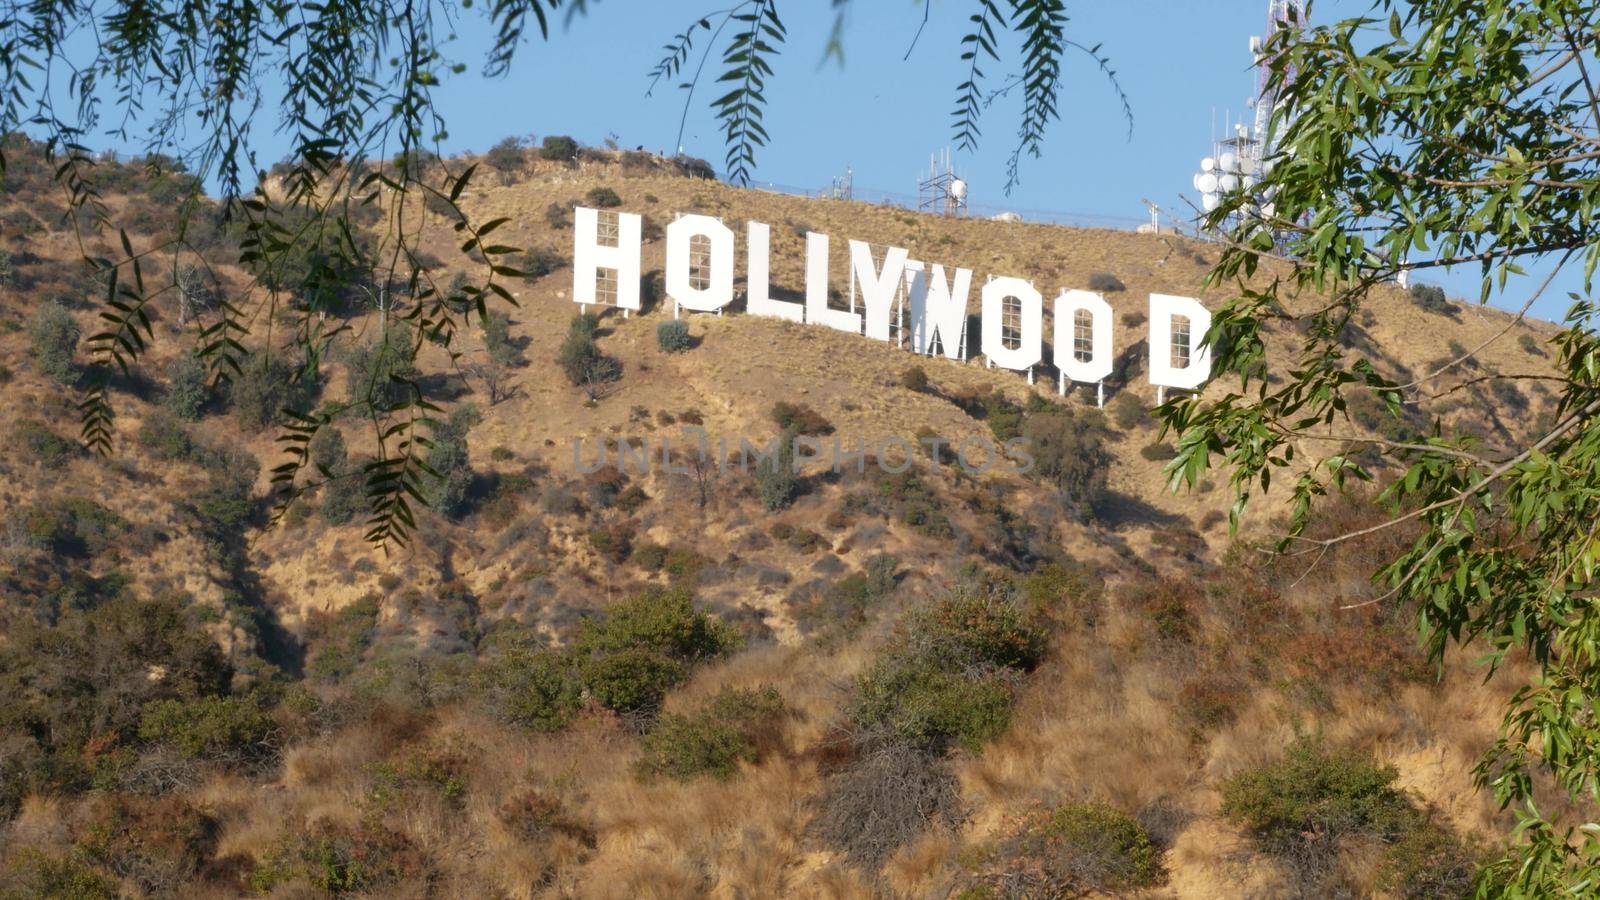 LOS ANGELES, CALIFORNIA, USA - 7 NOV 2019: Iconic Hollywood sign. Big letters on hills as symbol of cinema, movie studios and entertainment industry. Large text on mountain, view thru green leaves by DogoraSun